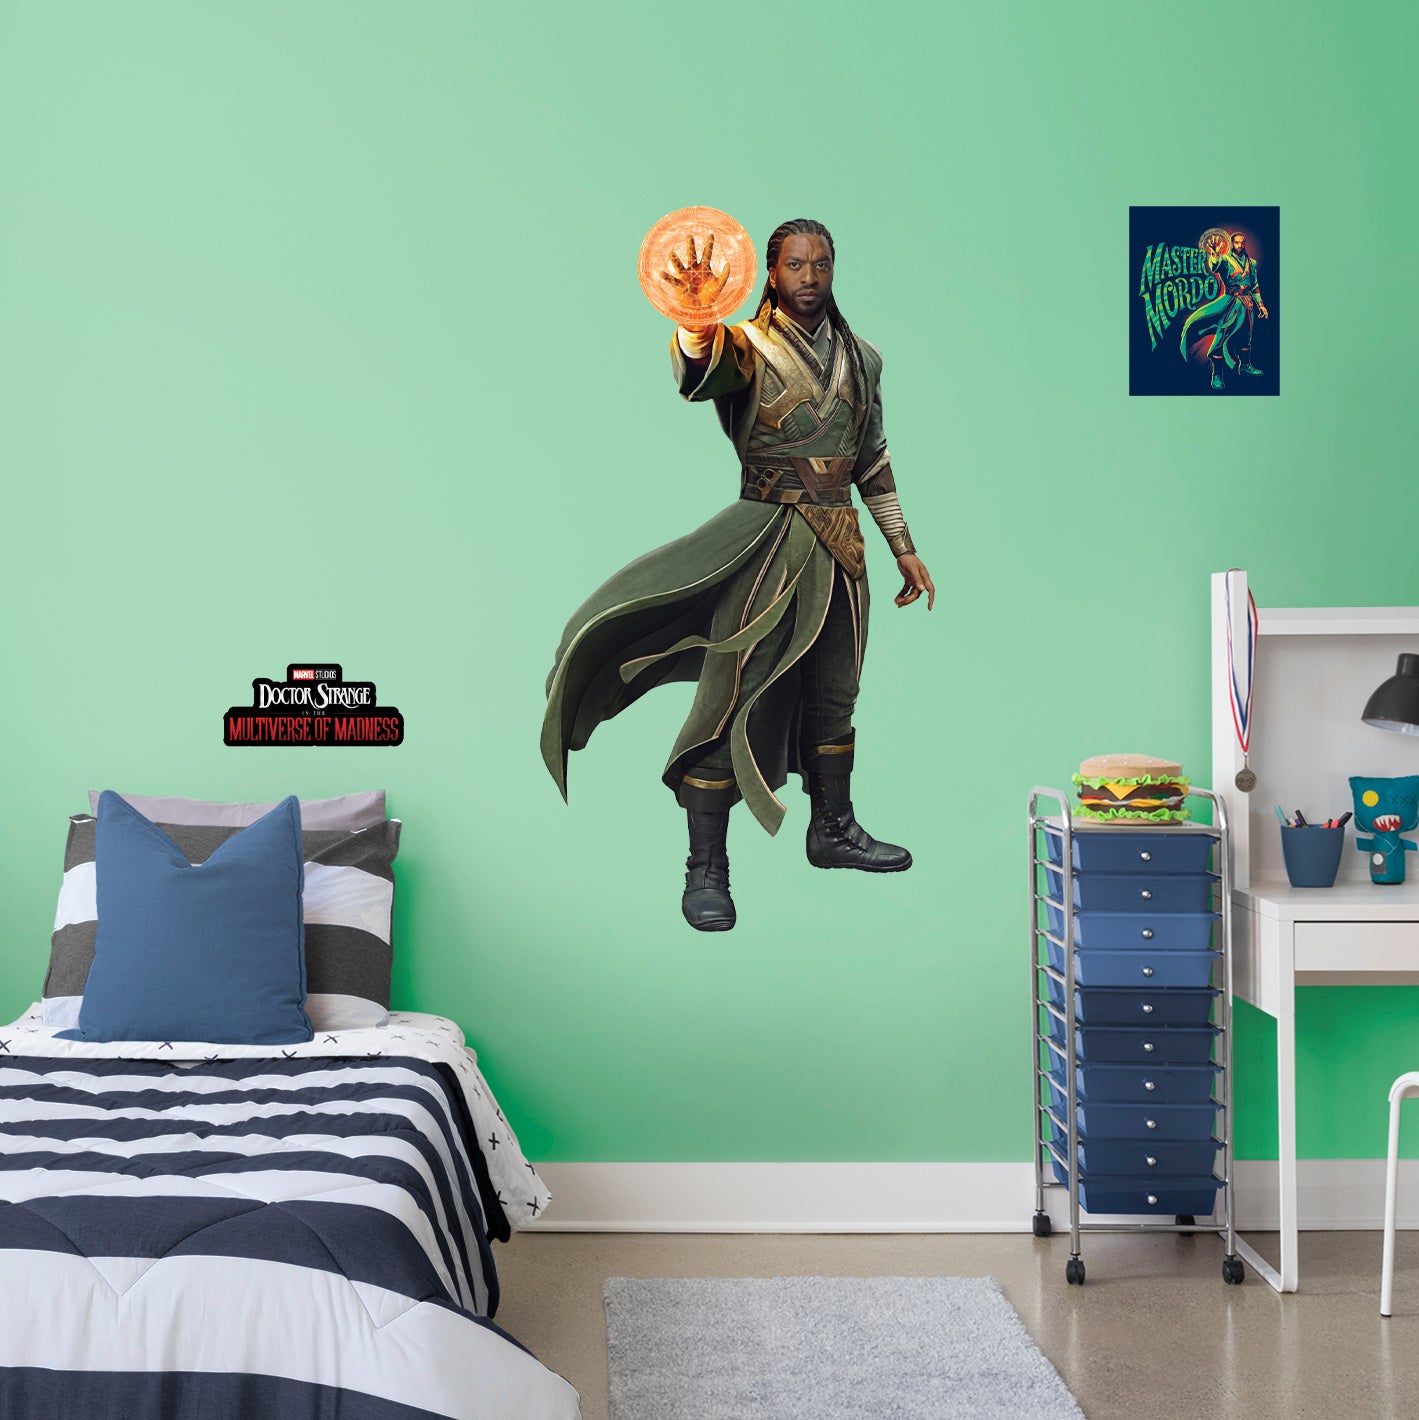 Doctor Strange 2: In the Multiverse of Madness: Master Mordo RealBig - Officially Licensed Marvel Removable Adhesive Decal